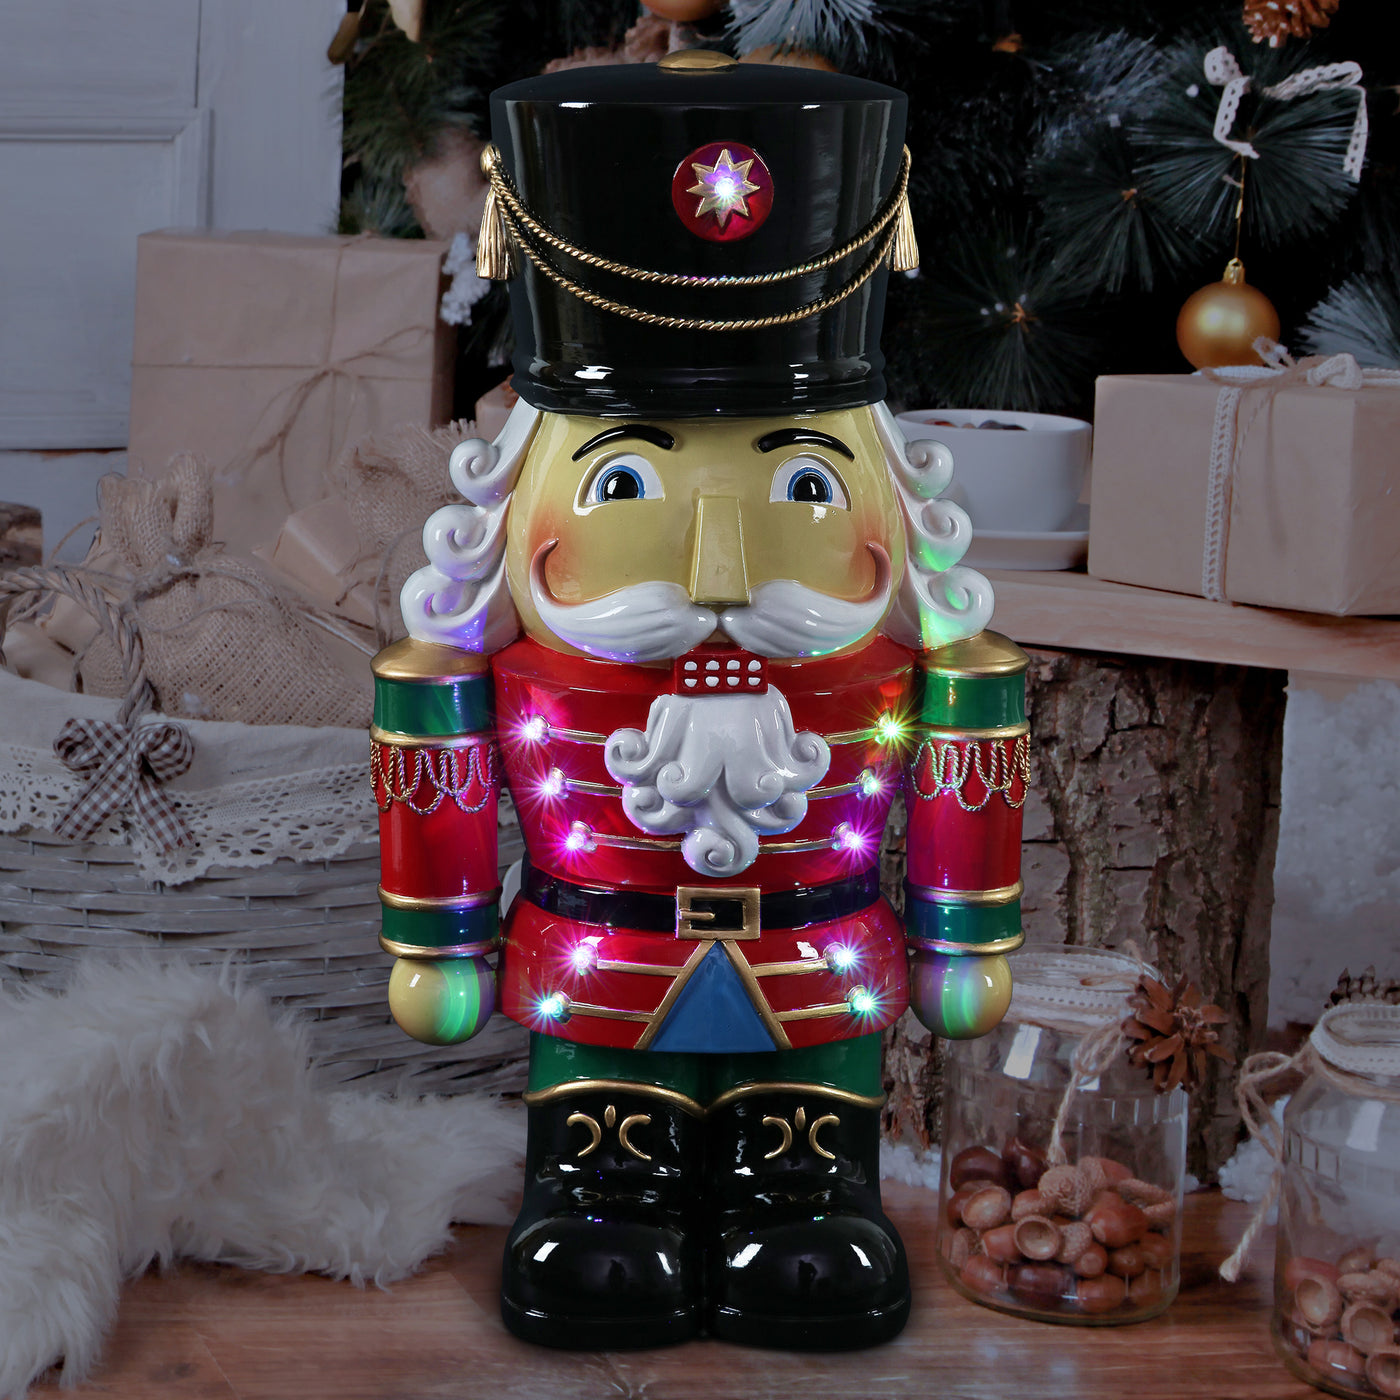 Christmas Blow Mold Tabletop Nutcracker Soldier 11 inches Light Up